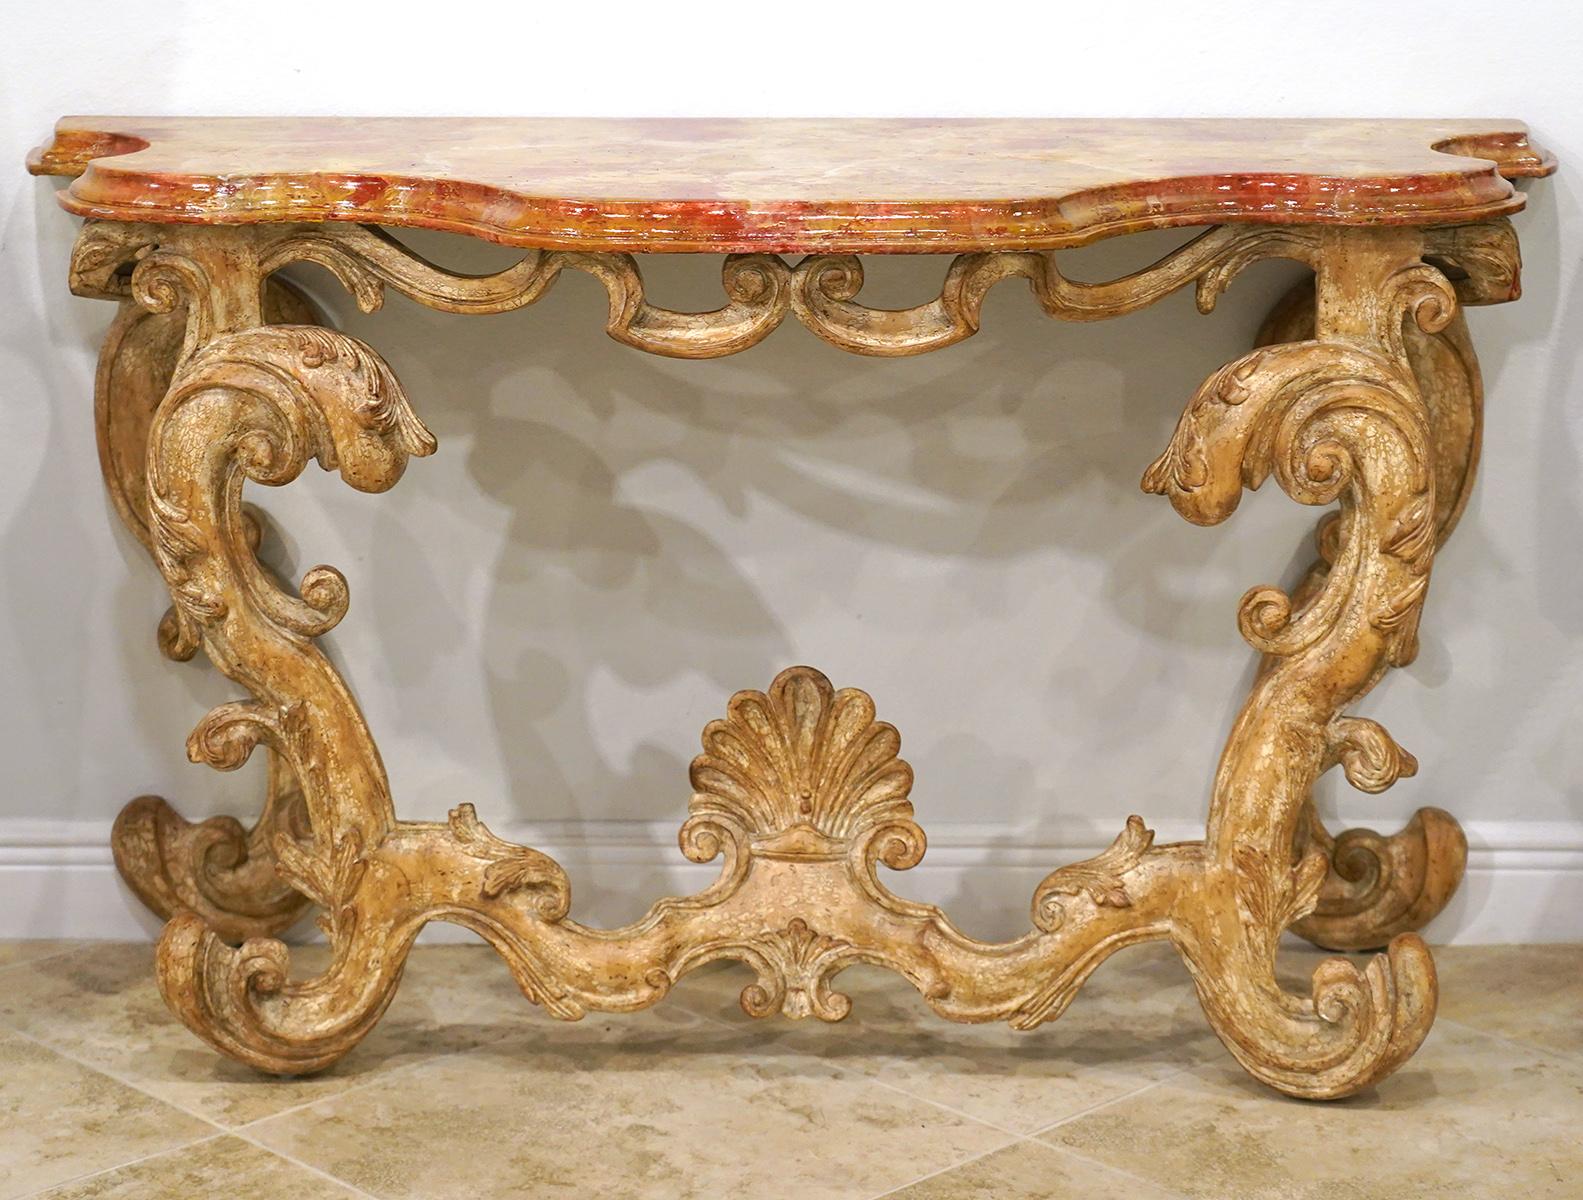 This pair of Italian Baroque style carved console tables feature marbleized shaped and molded tops above sumptuously carved frames in blonde wood with traces of paint. The front stretchers center elegant shell carvings.